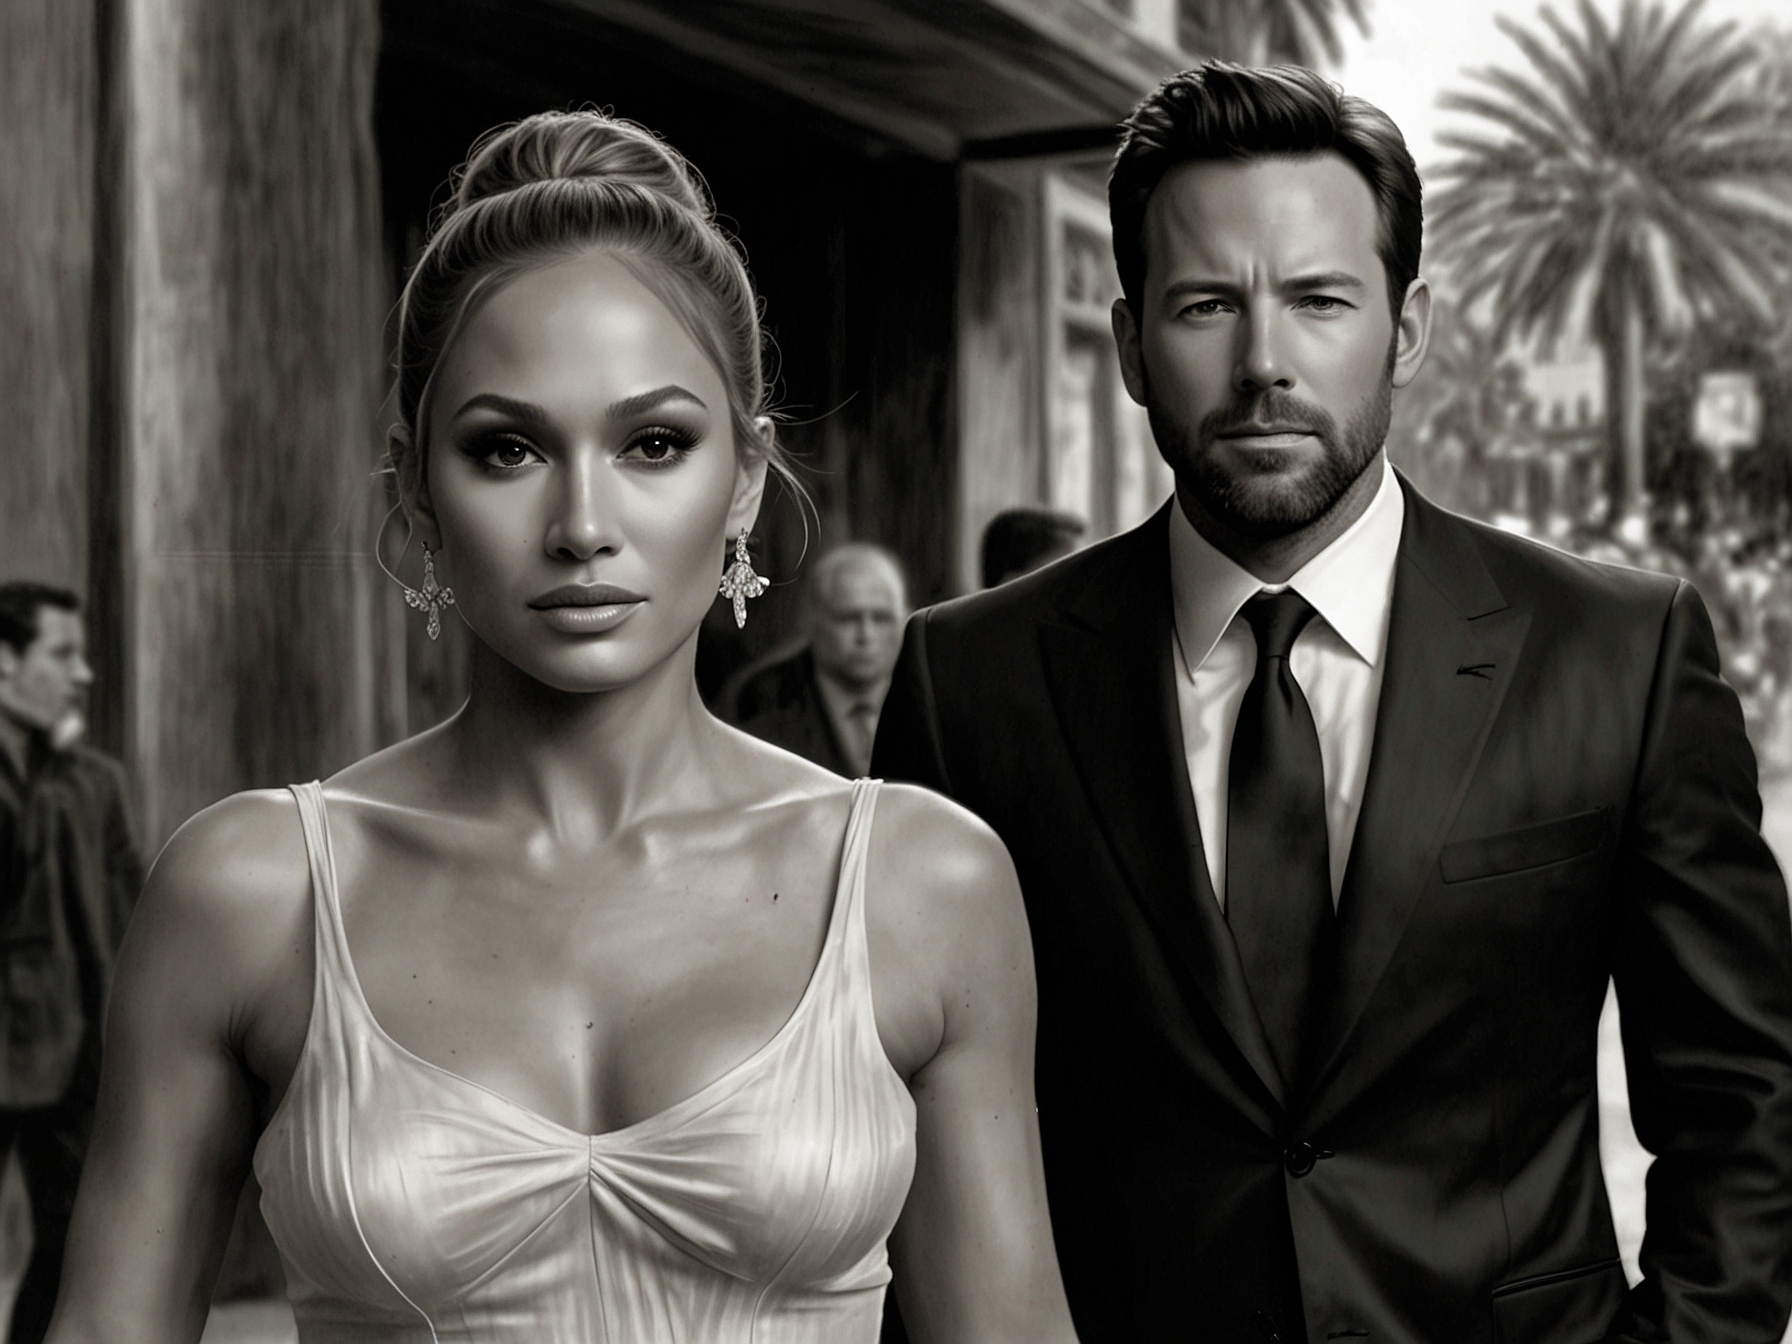 Jennifer Lopez and Ben Affleck walking together, portraying a calm yet tense moment, amidst swirling rumors and relentless attention from the press.